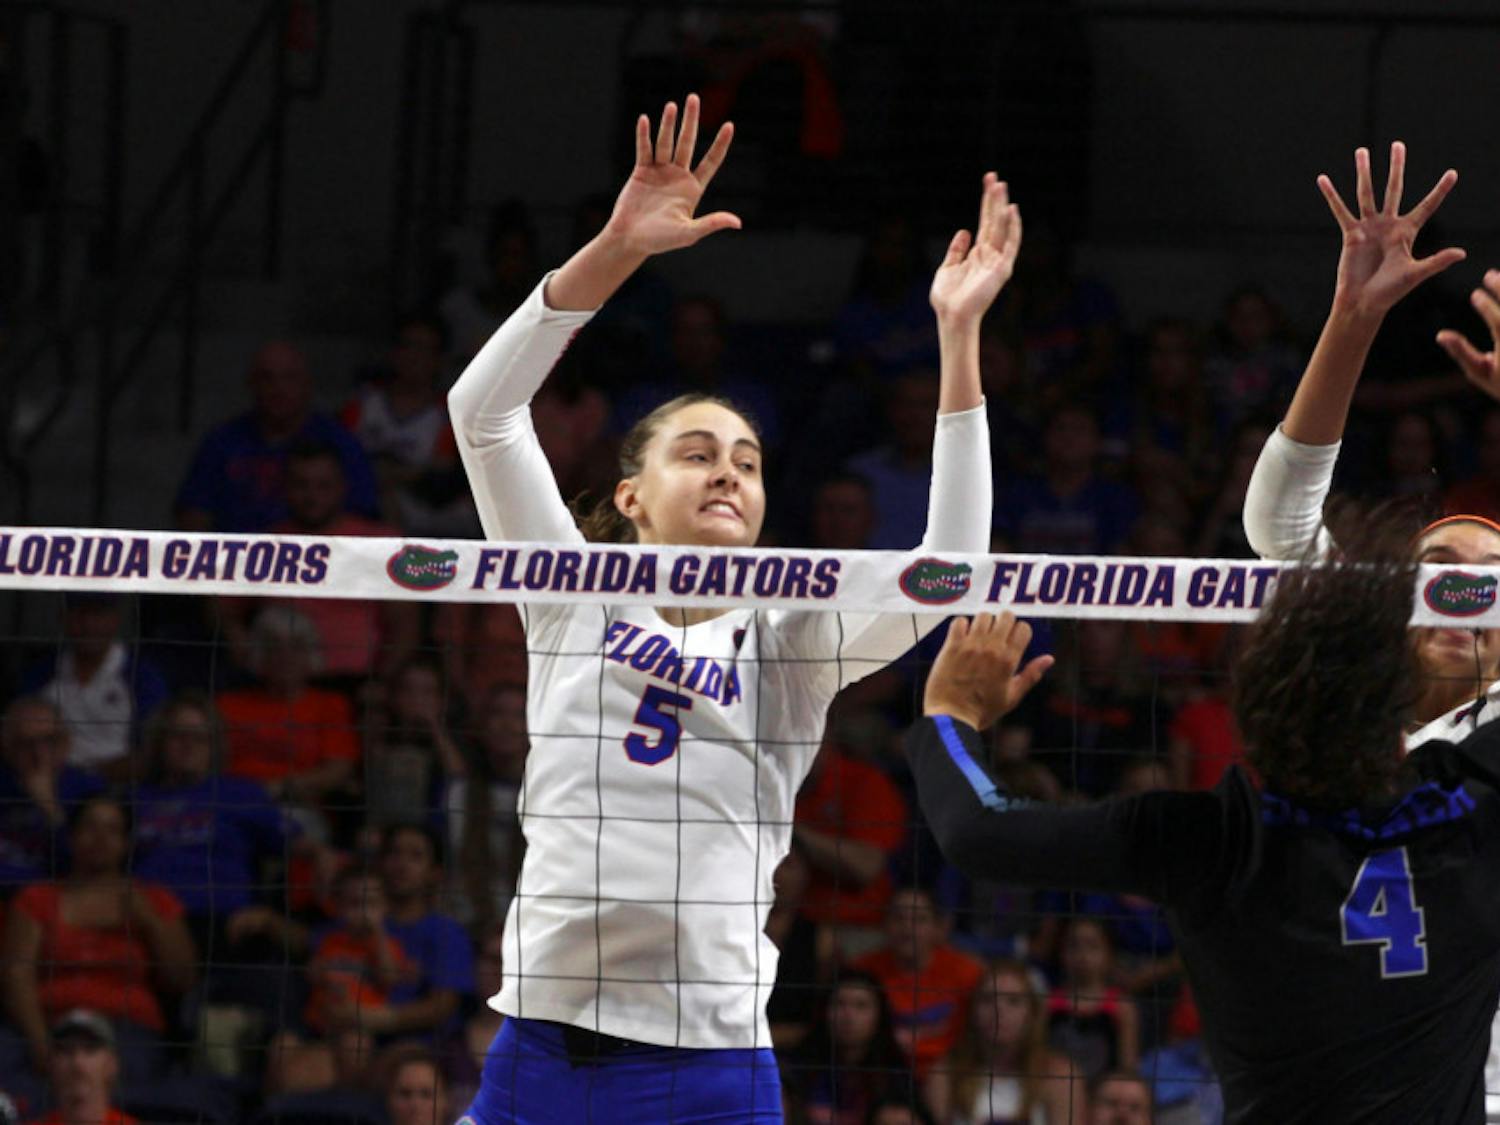 Middle blocker Rachael Kramer (left) said she believes this year's Gators squad is better than last season's. "The defense on this team is out of this world," she said.